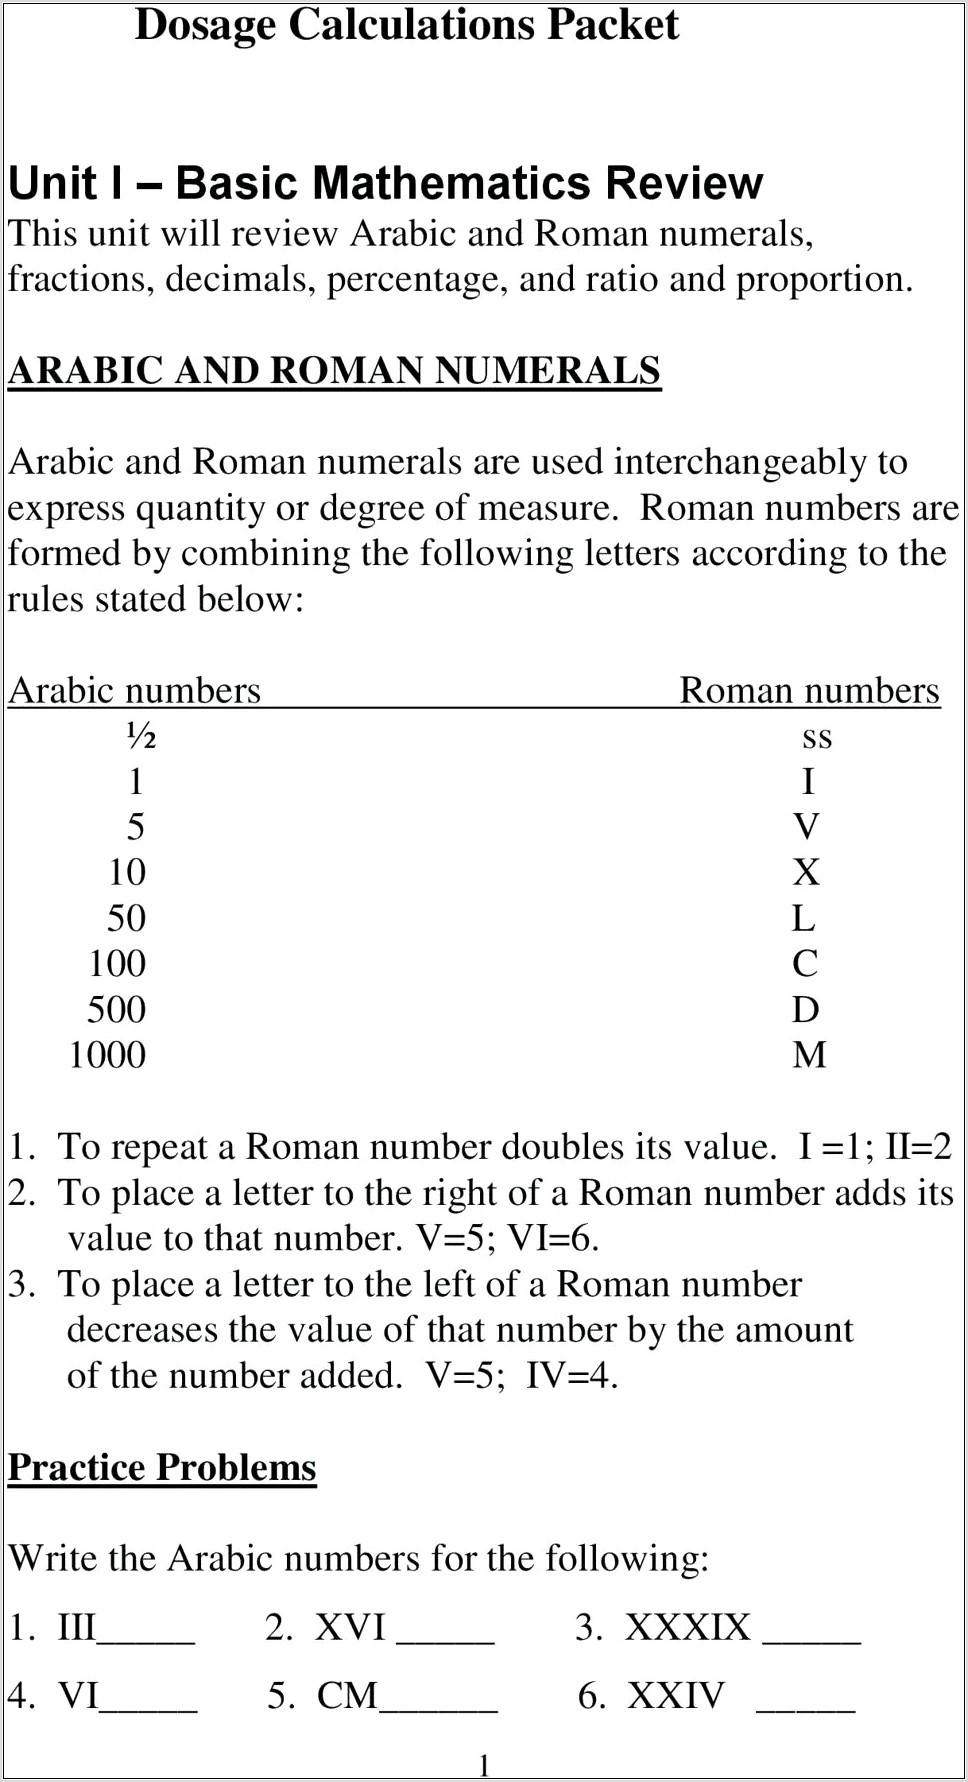 Roman Numeral Calculations Worksheet